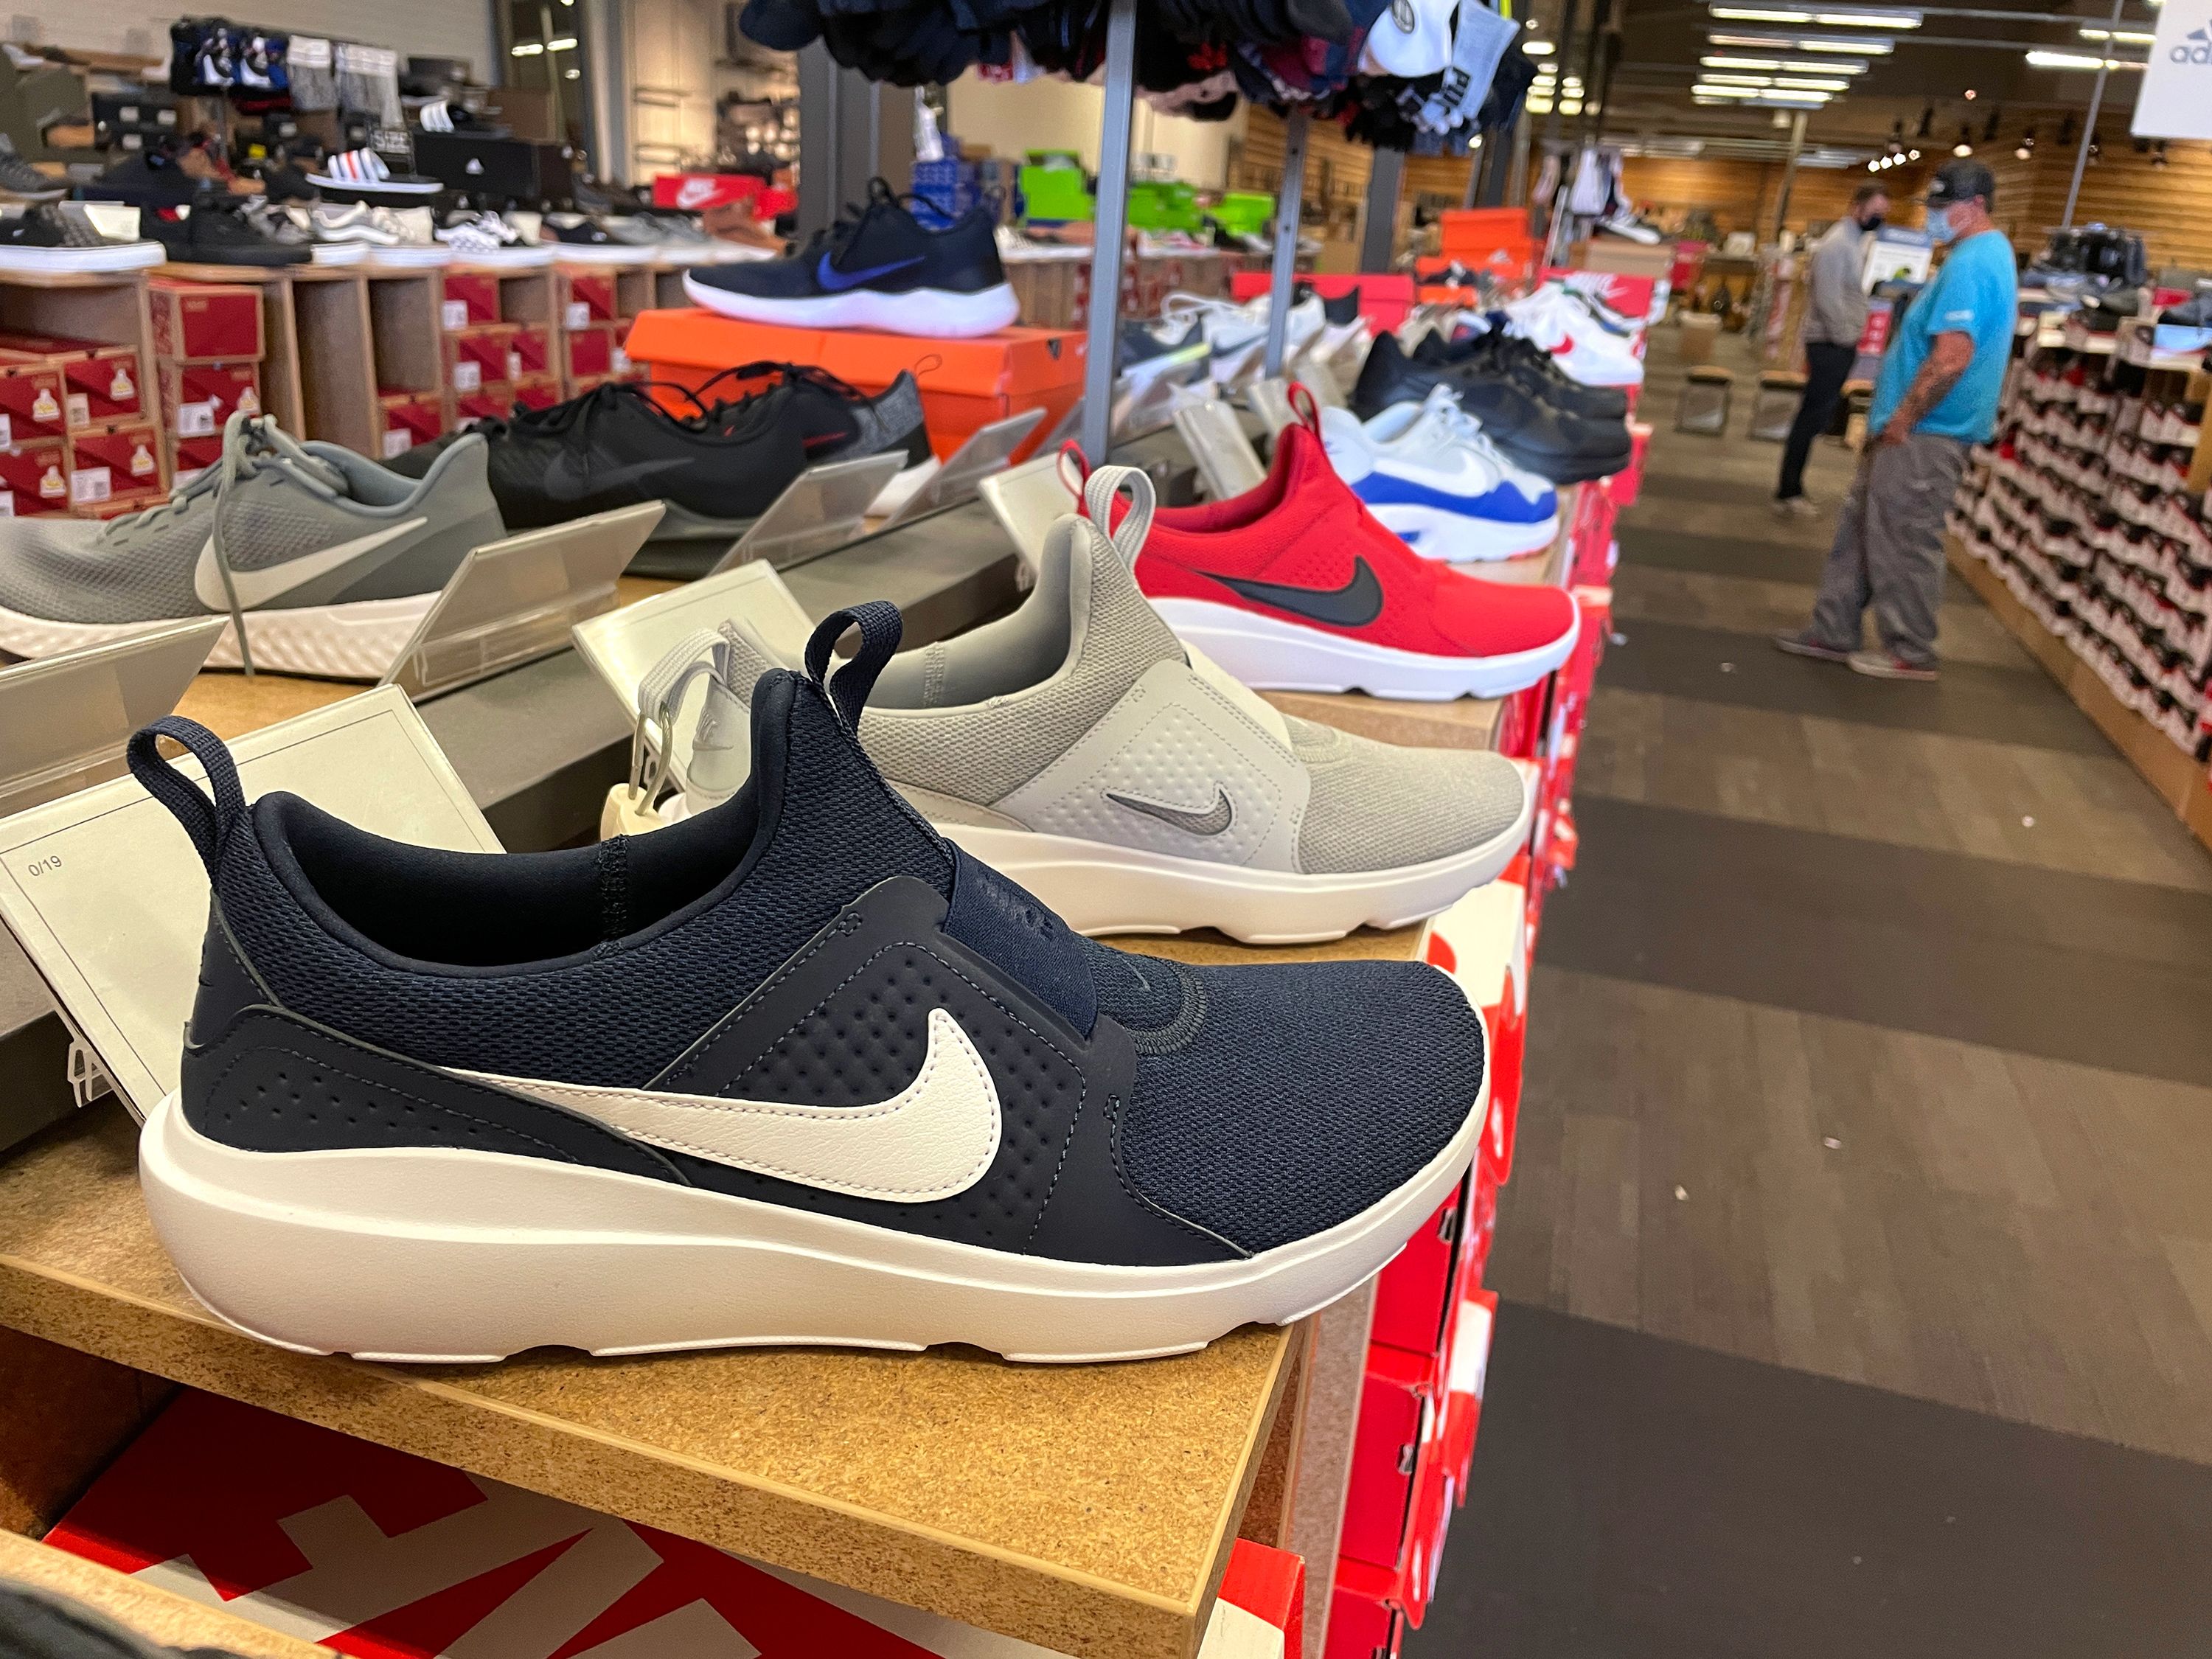 aficionado A pie A fondo Nike, Under Armour and others face supply problems in Vietnam | CNN Business